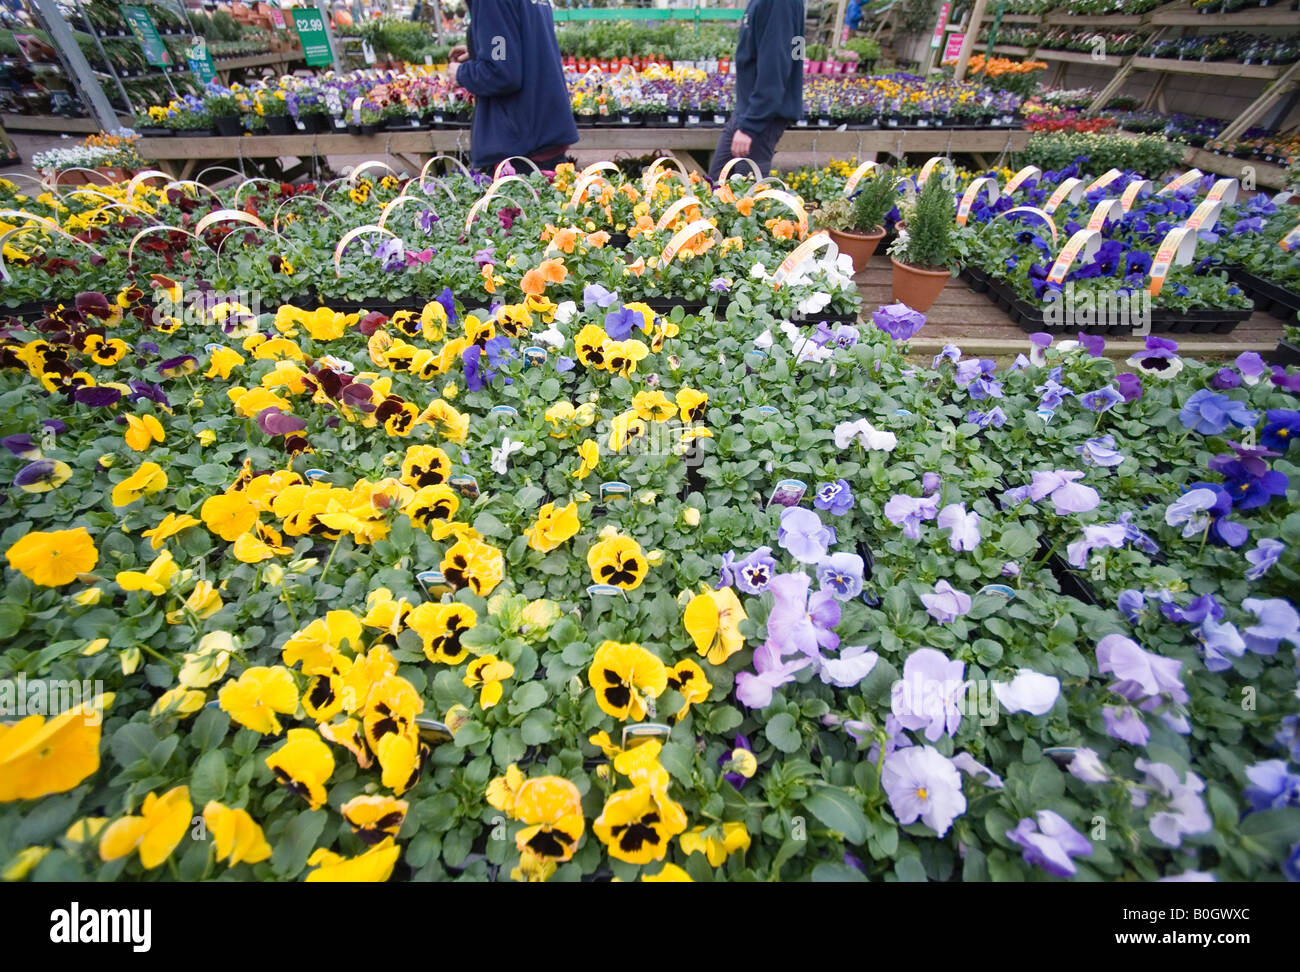 Gardeners Tend Rows Of Pansies At A Dobbies Garden Centre Stock